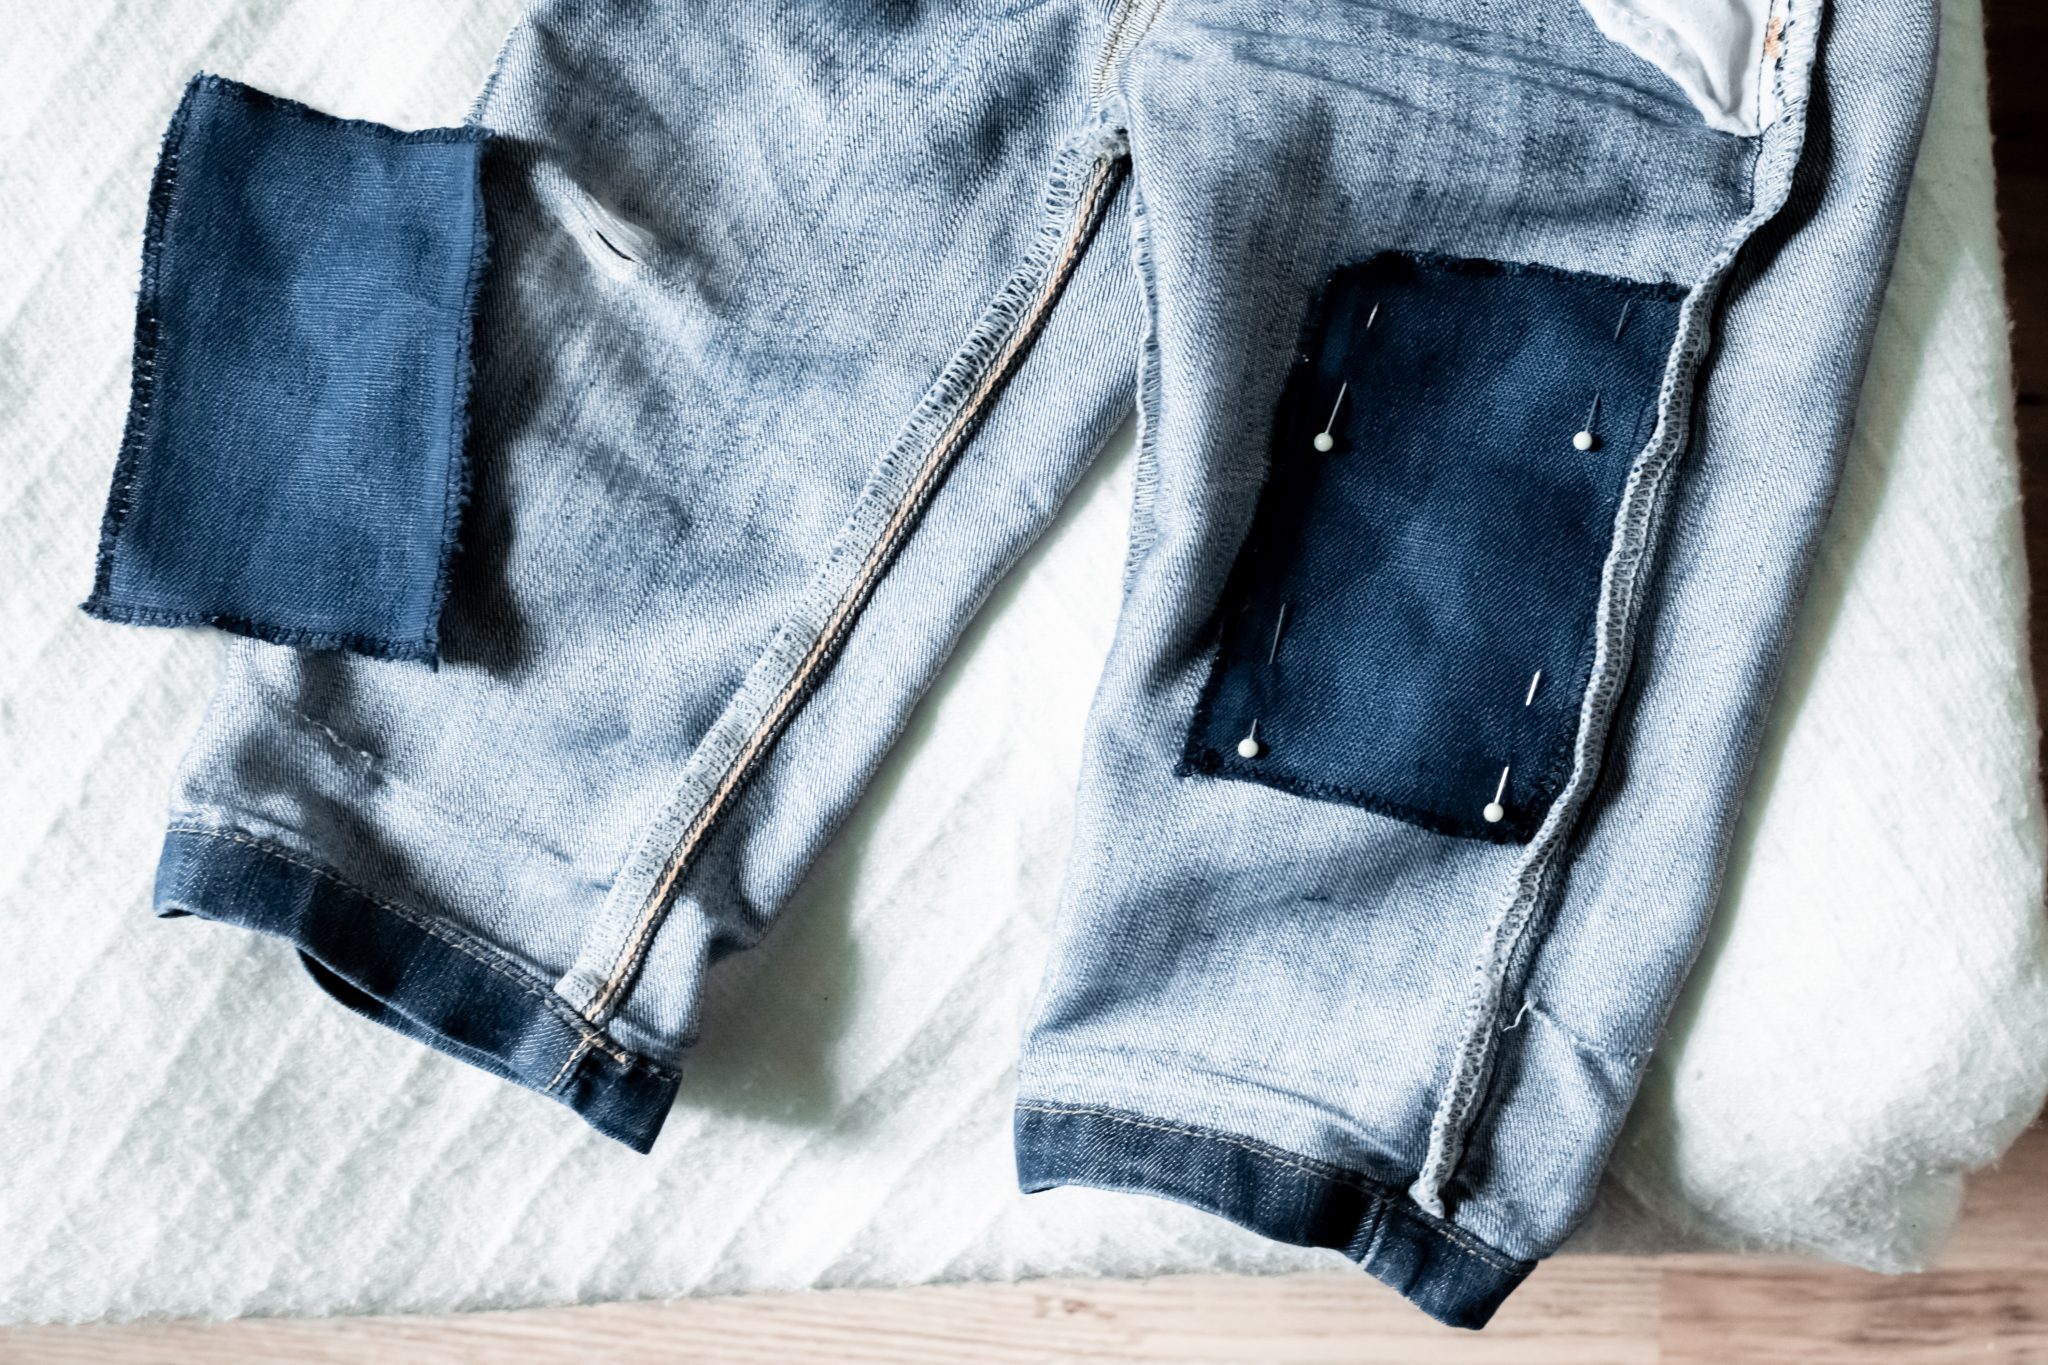 How to mend your clothes with Japanese stitching (sashiko) | aboderie